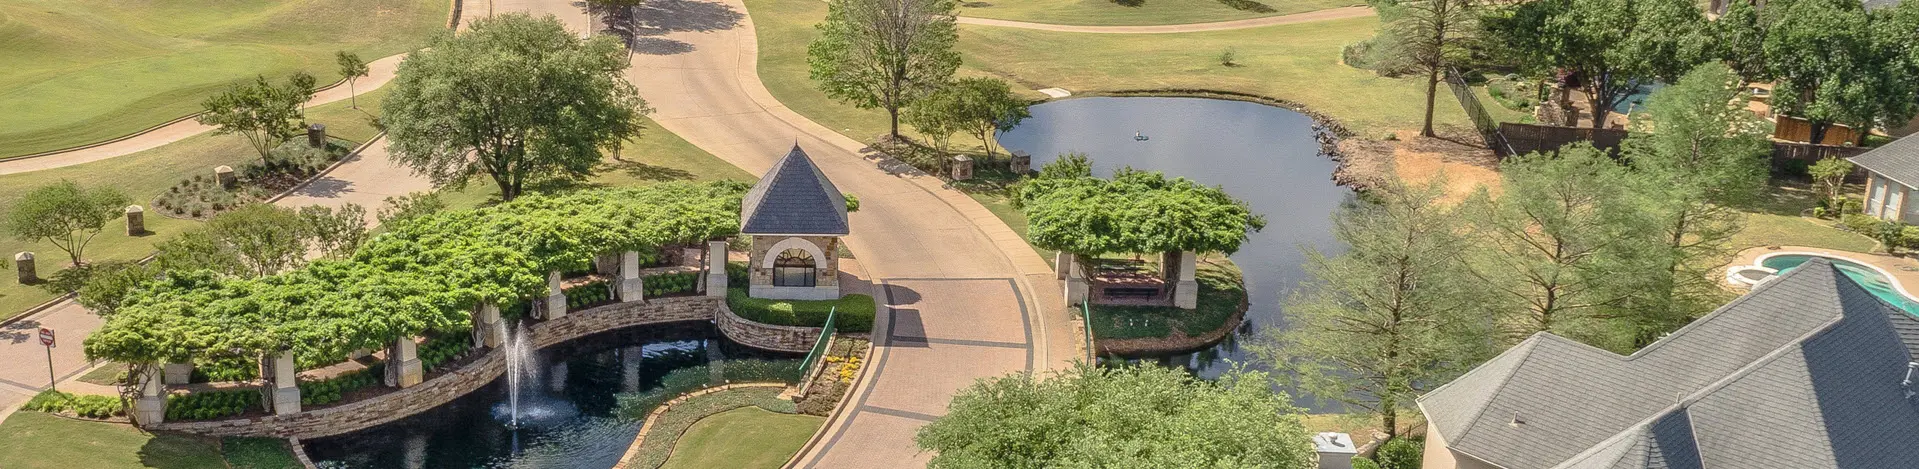 Southlake, TX Luxury Real Estate, Neighborhoods, Mansions, Homes For Sale